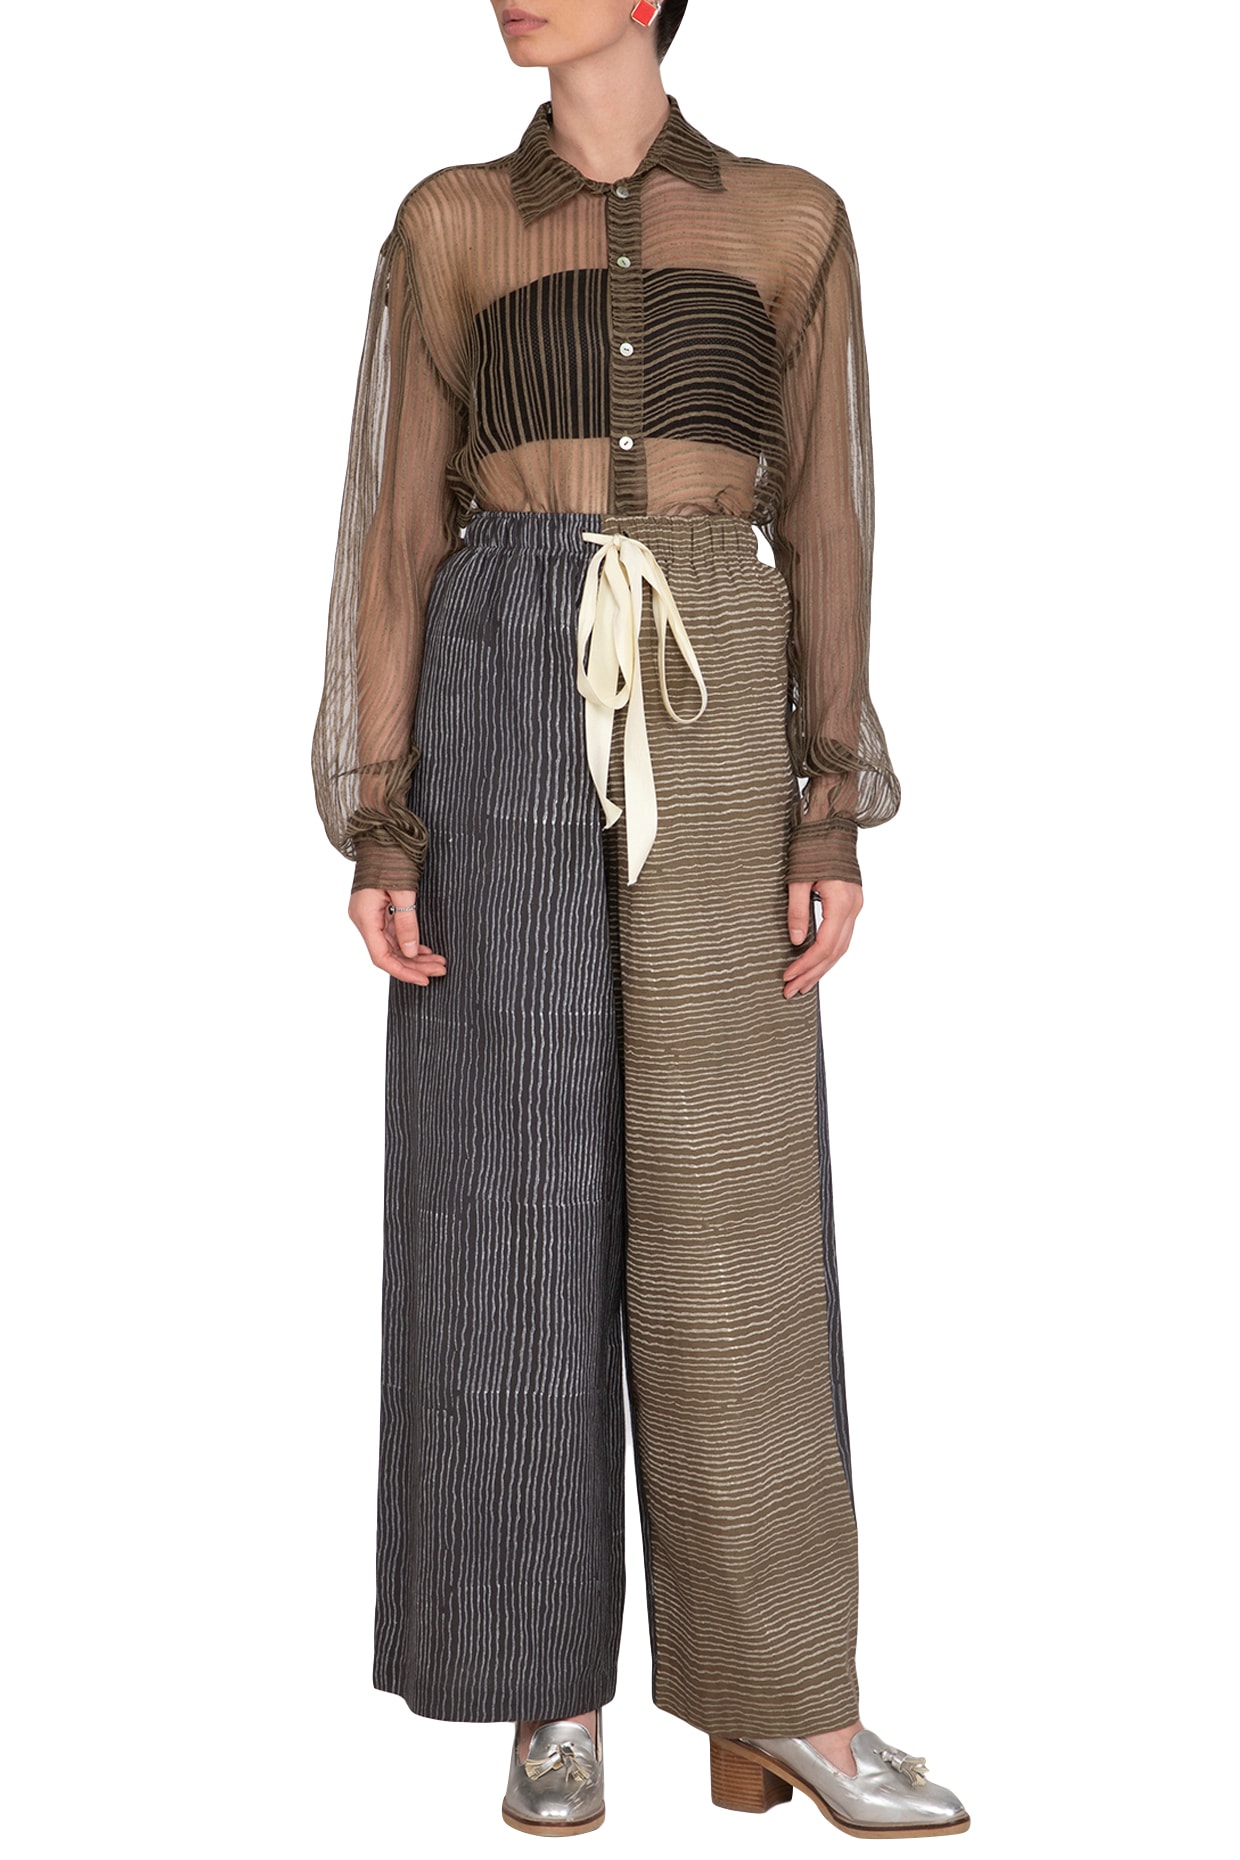 Buy Slouchy Pants Online In India  Etsy India